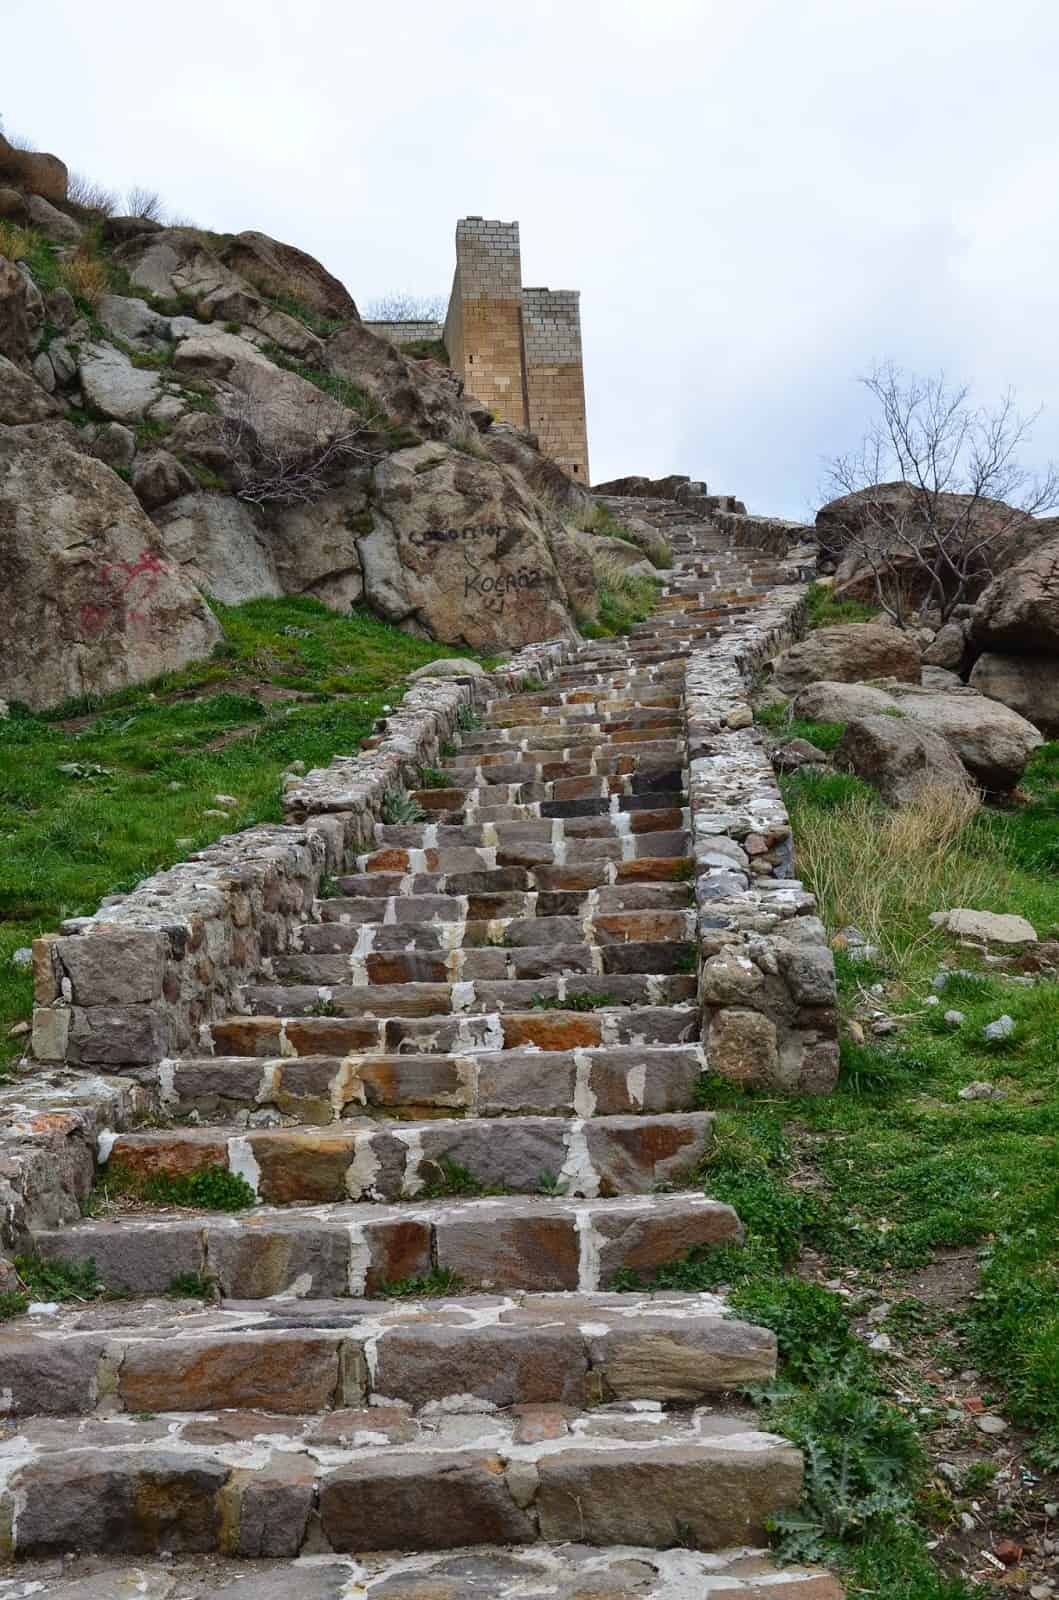 The steps up to Afyon Kalesi in Afyon, Turkey